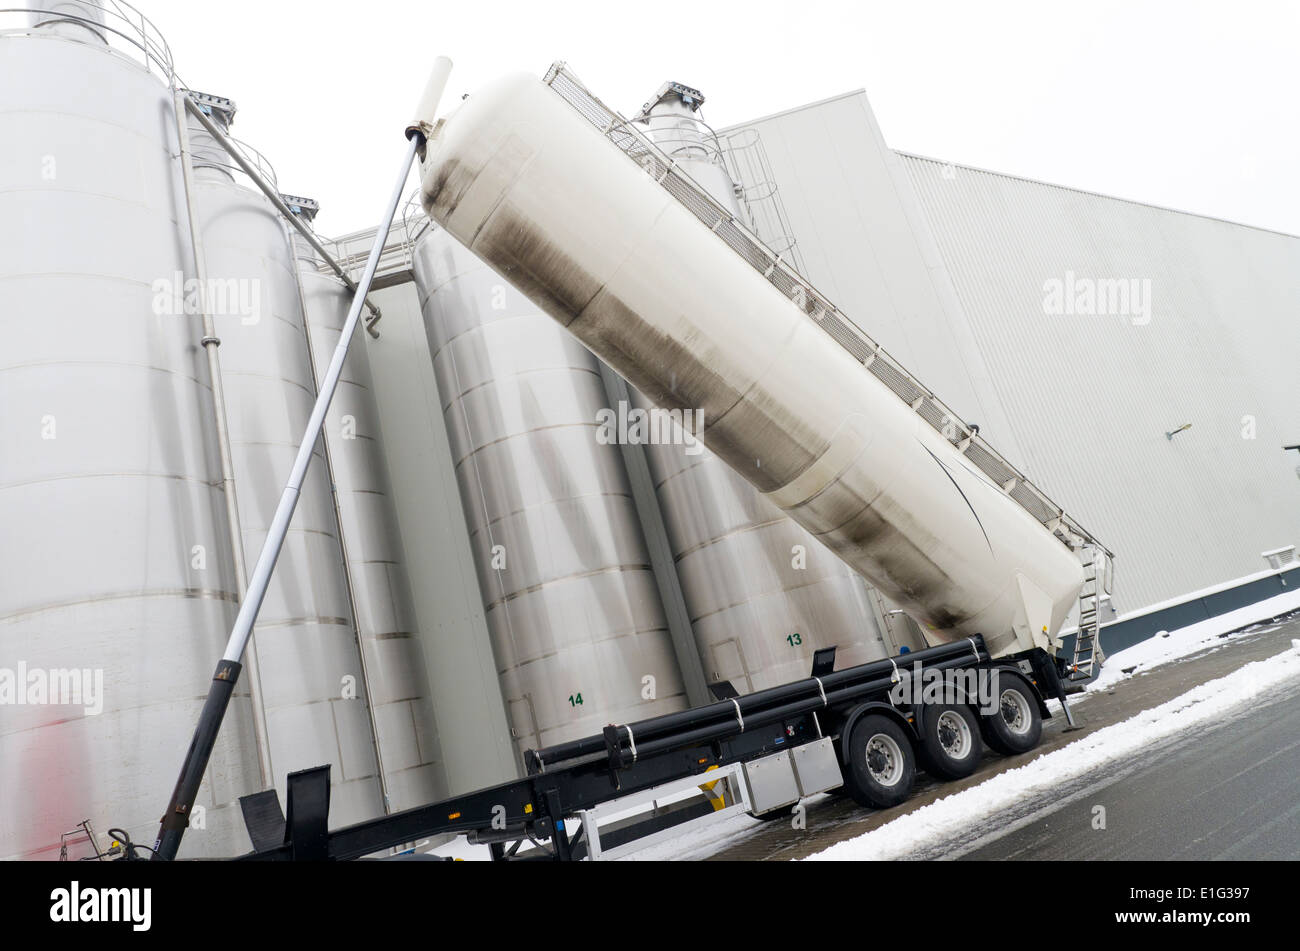 tanker truck refilling some large silos for food industry Stock Photo